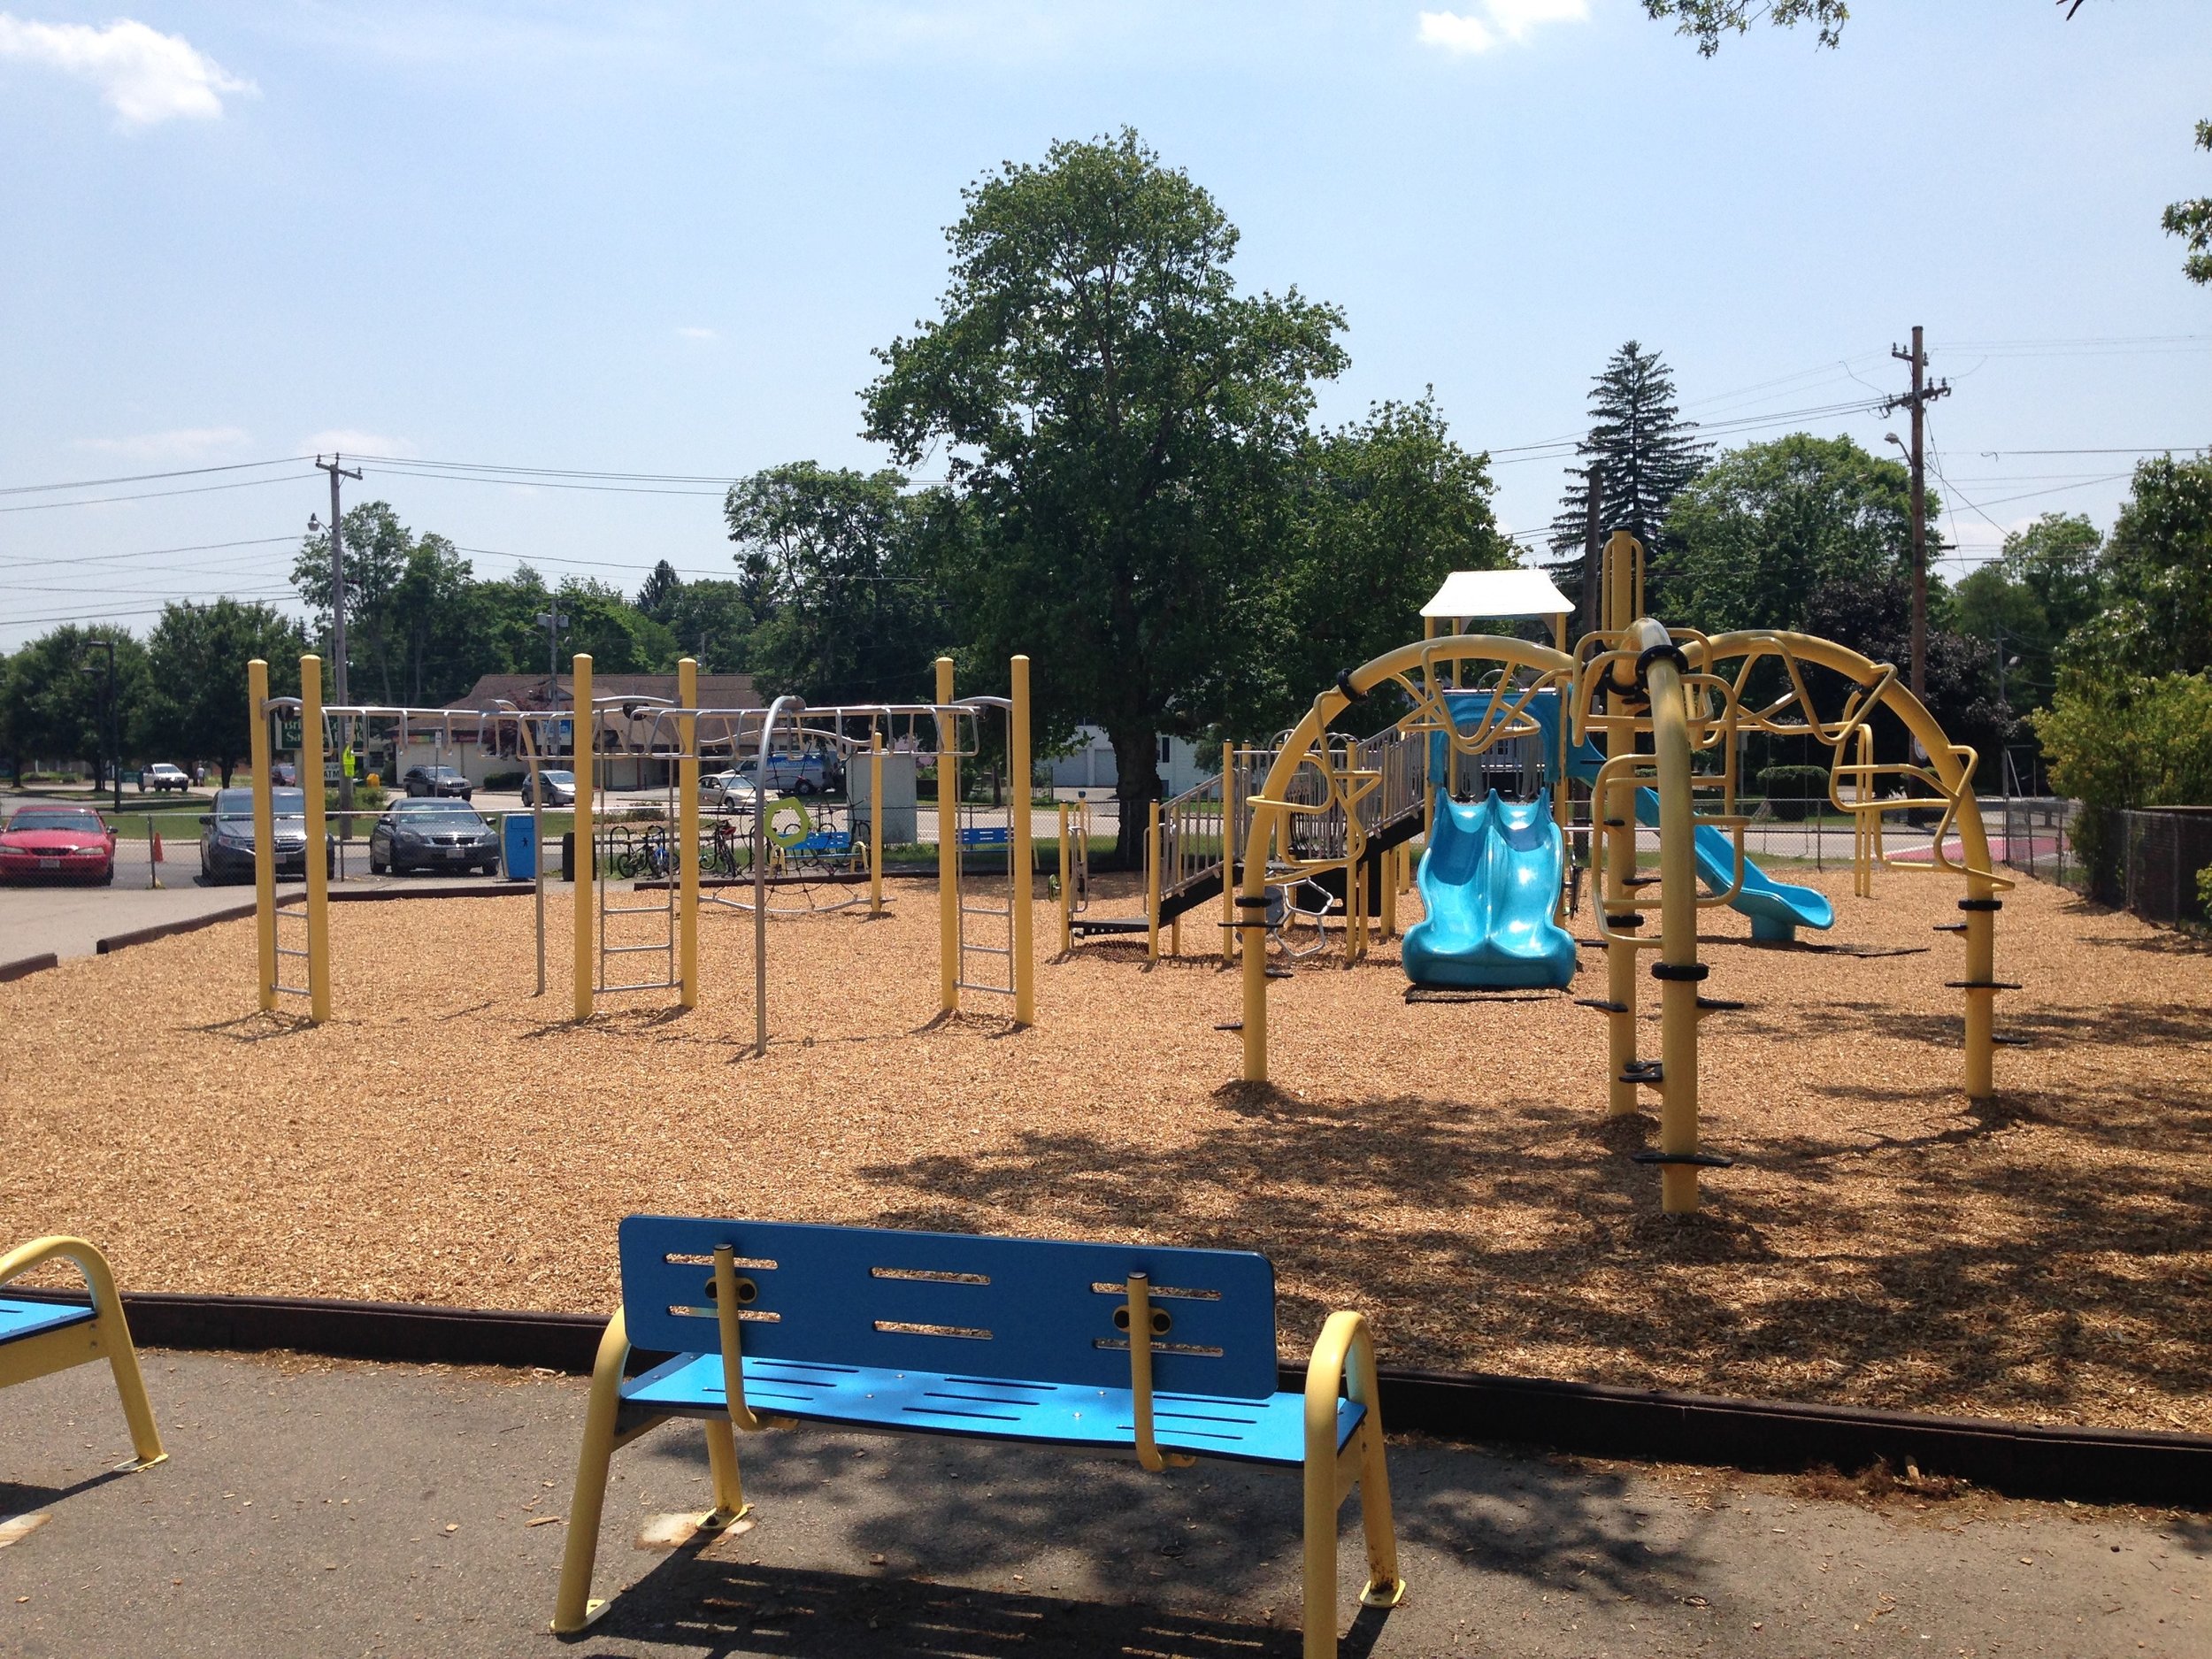 School Playground with matching play structures and benches.jpg